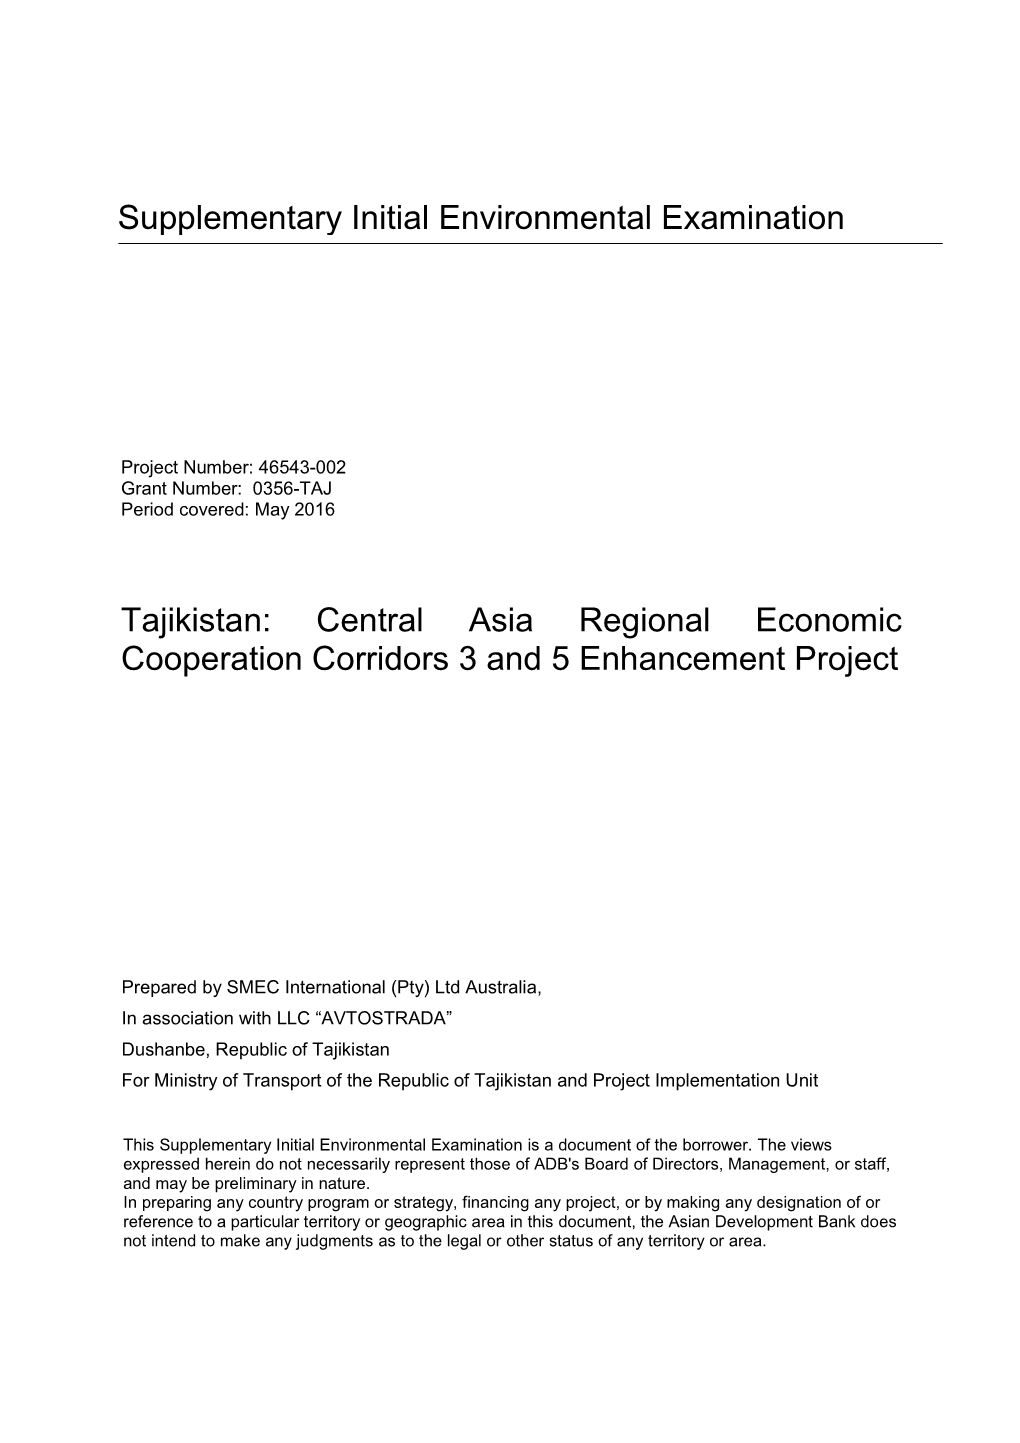 Central Asia Regional Economic Cooperation Corridors 3 and 5 Enhancement Project